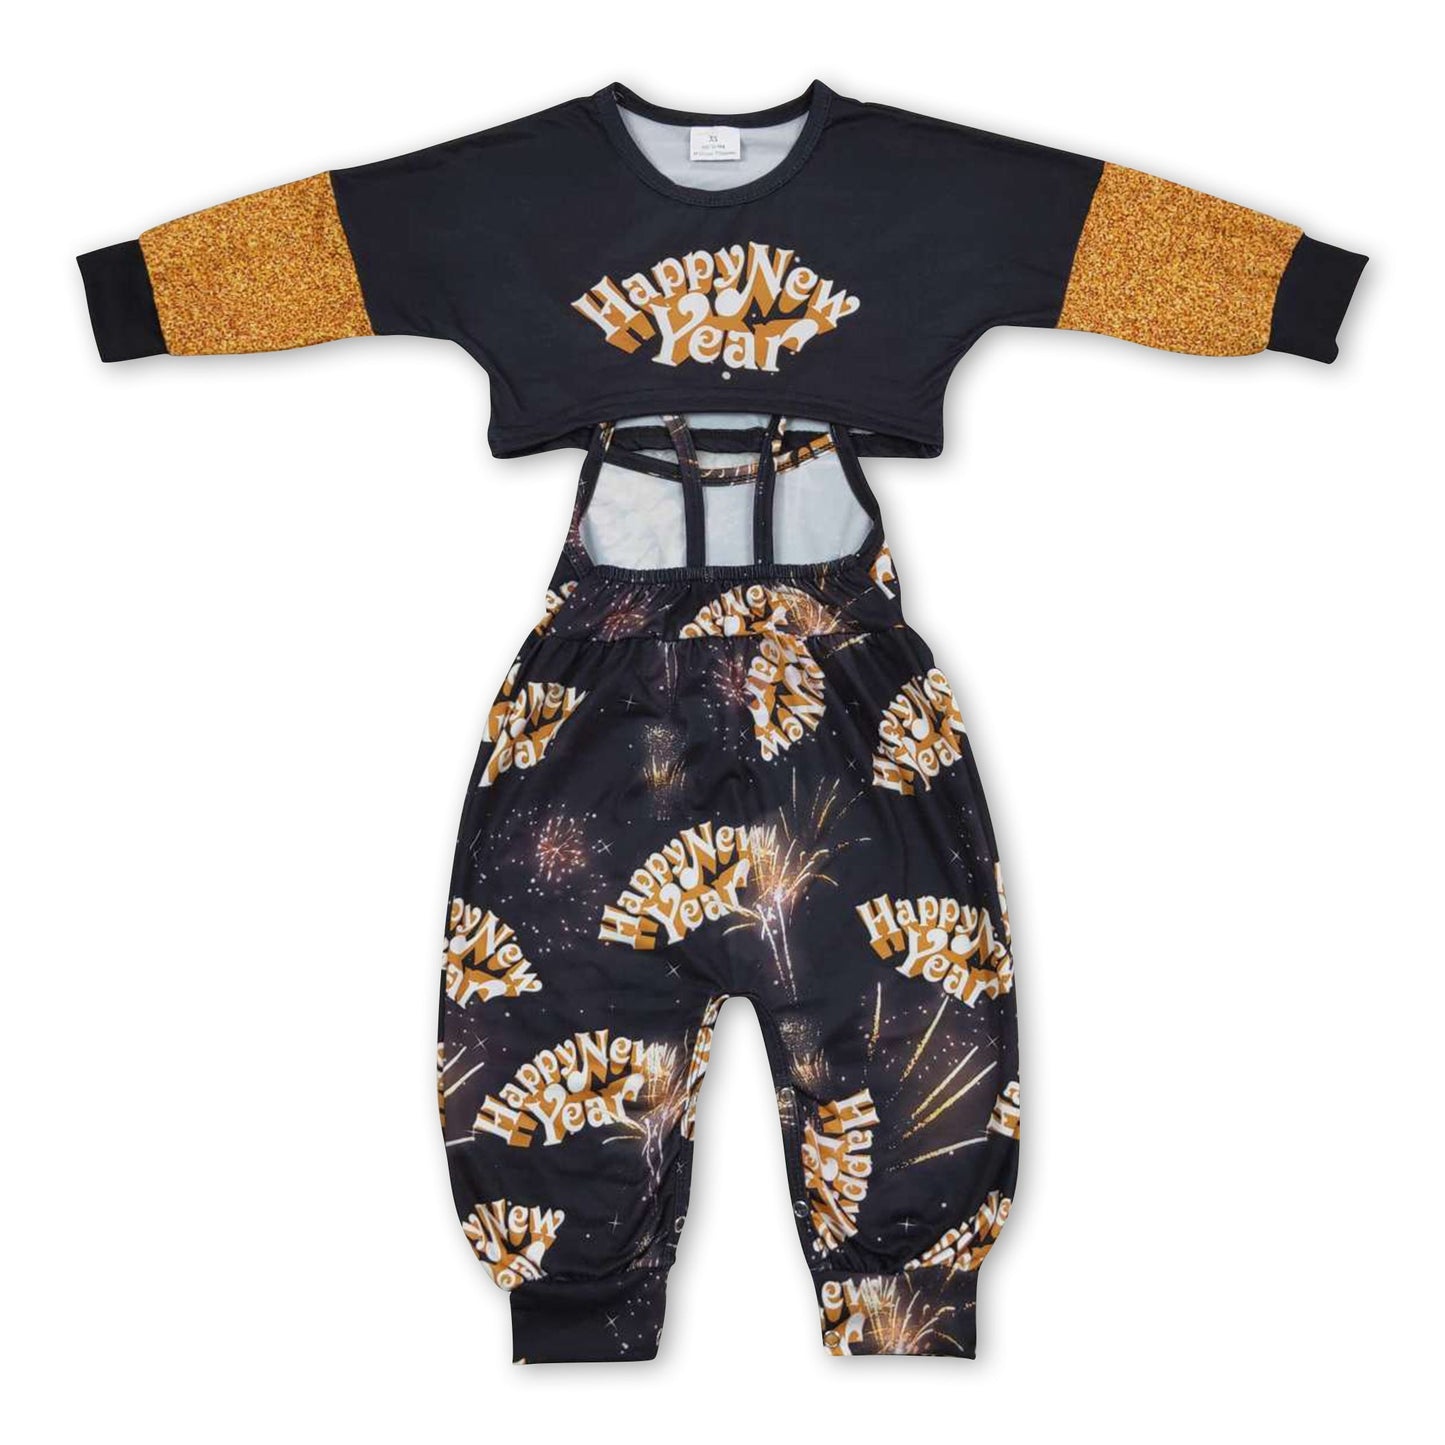 Happy new year gold jumpsuit top kids girls clothing